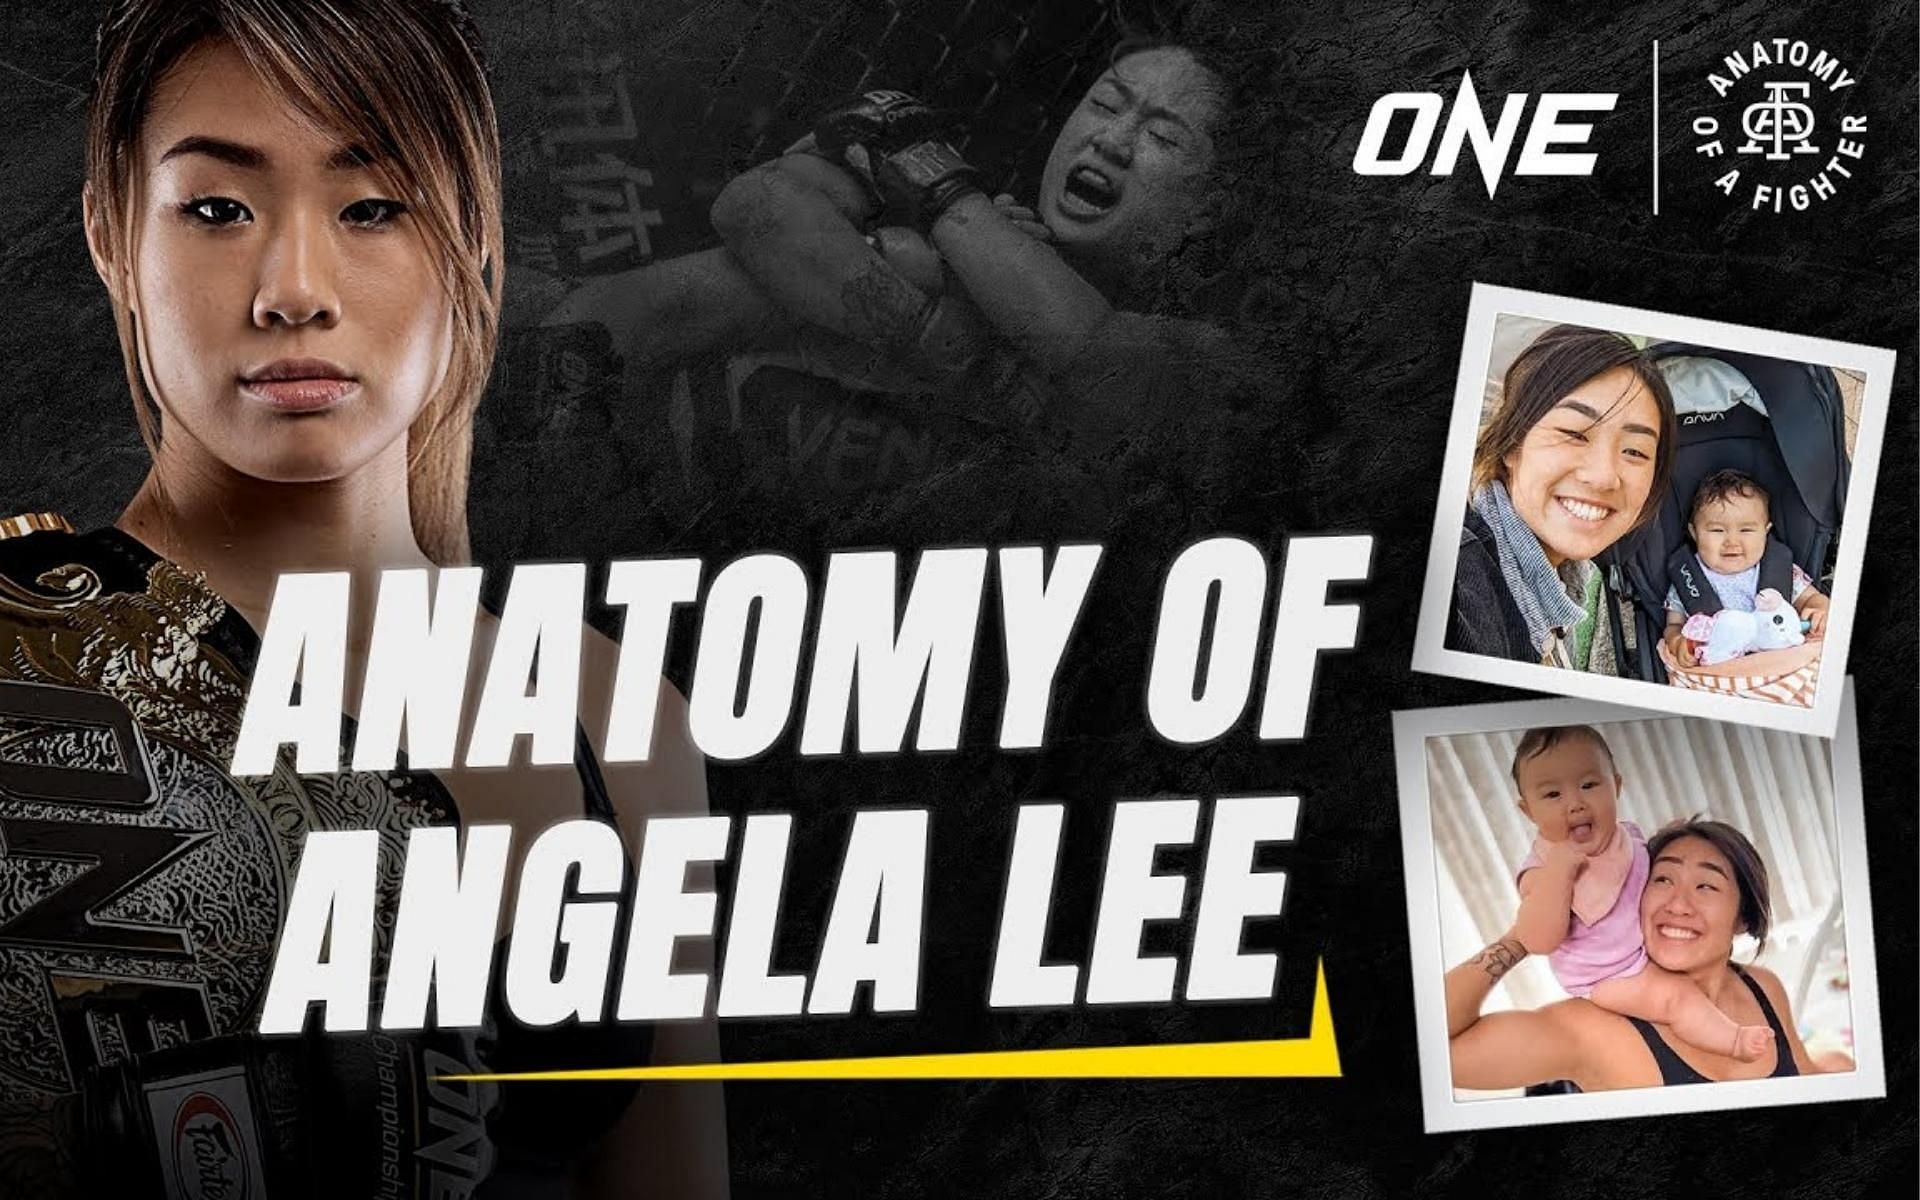 Anatomy of a Fighter recently concluded their feature on Angela Lee. (Image courtesy of Anatomy of a Fighter&#039;s YouTube page)